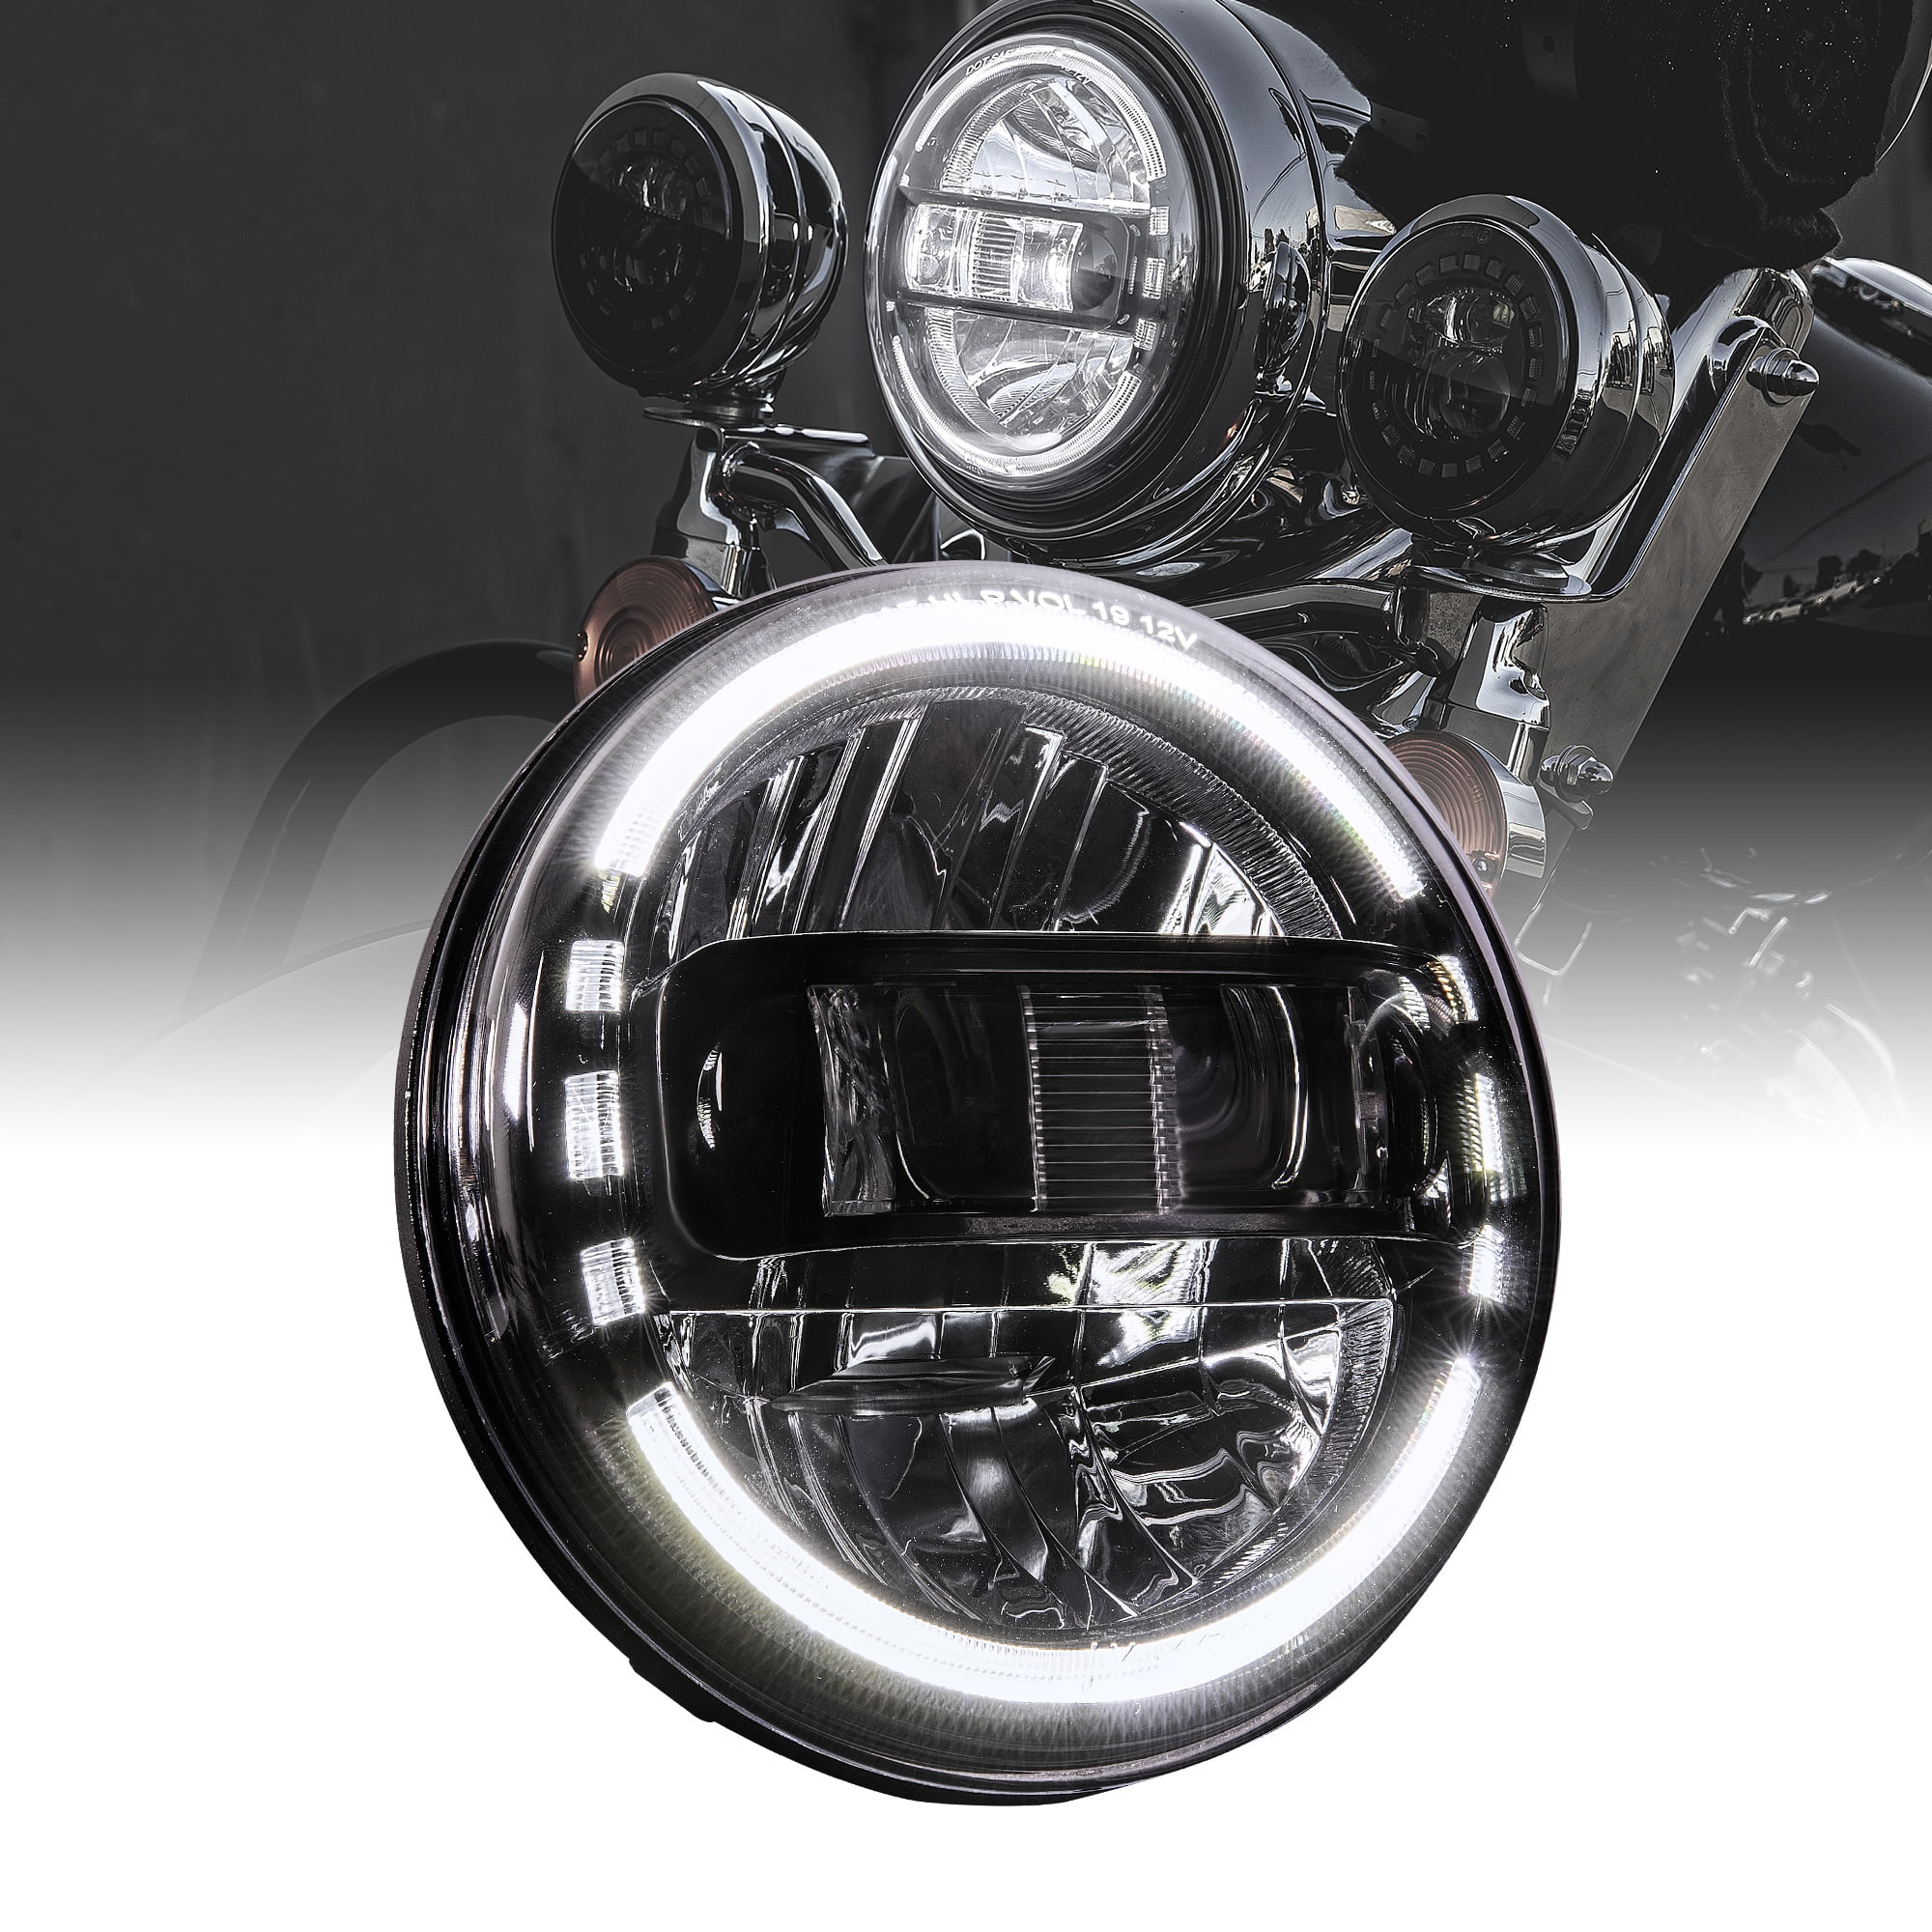 7 Halo LED Headlight with DRL For Harley Davidson Motorcycle Projector LED Headlamp Set Black,DOT Approved